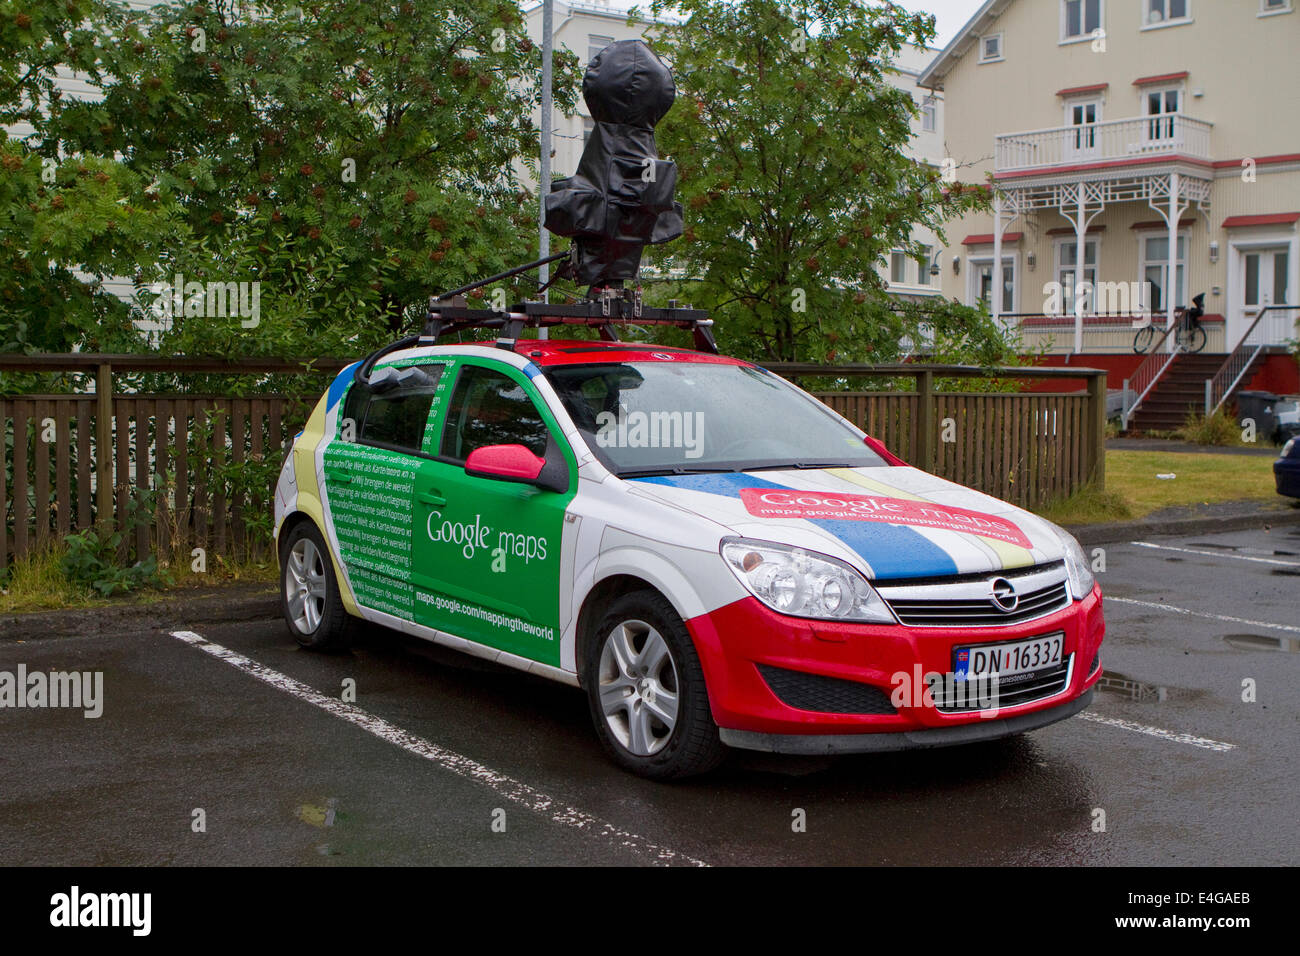 Google street view car standing in a parking lot Stock Photo